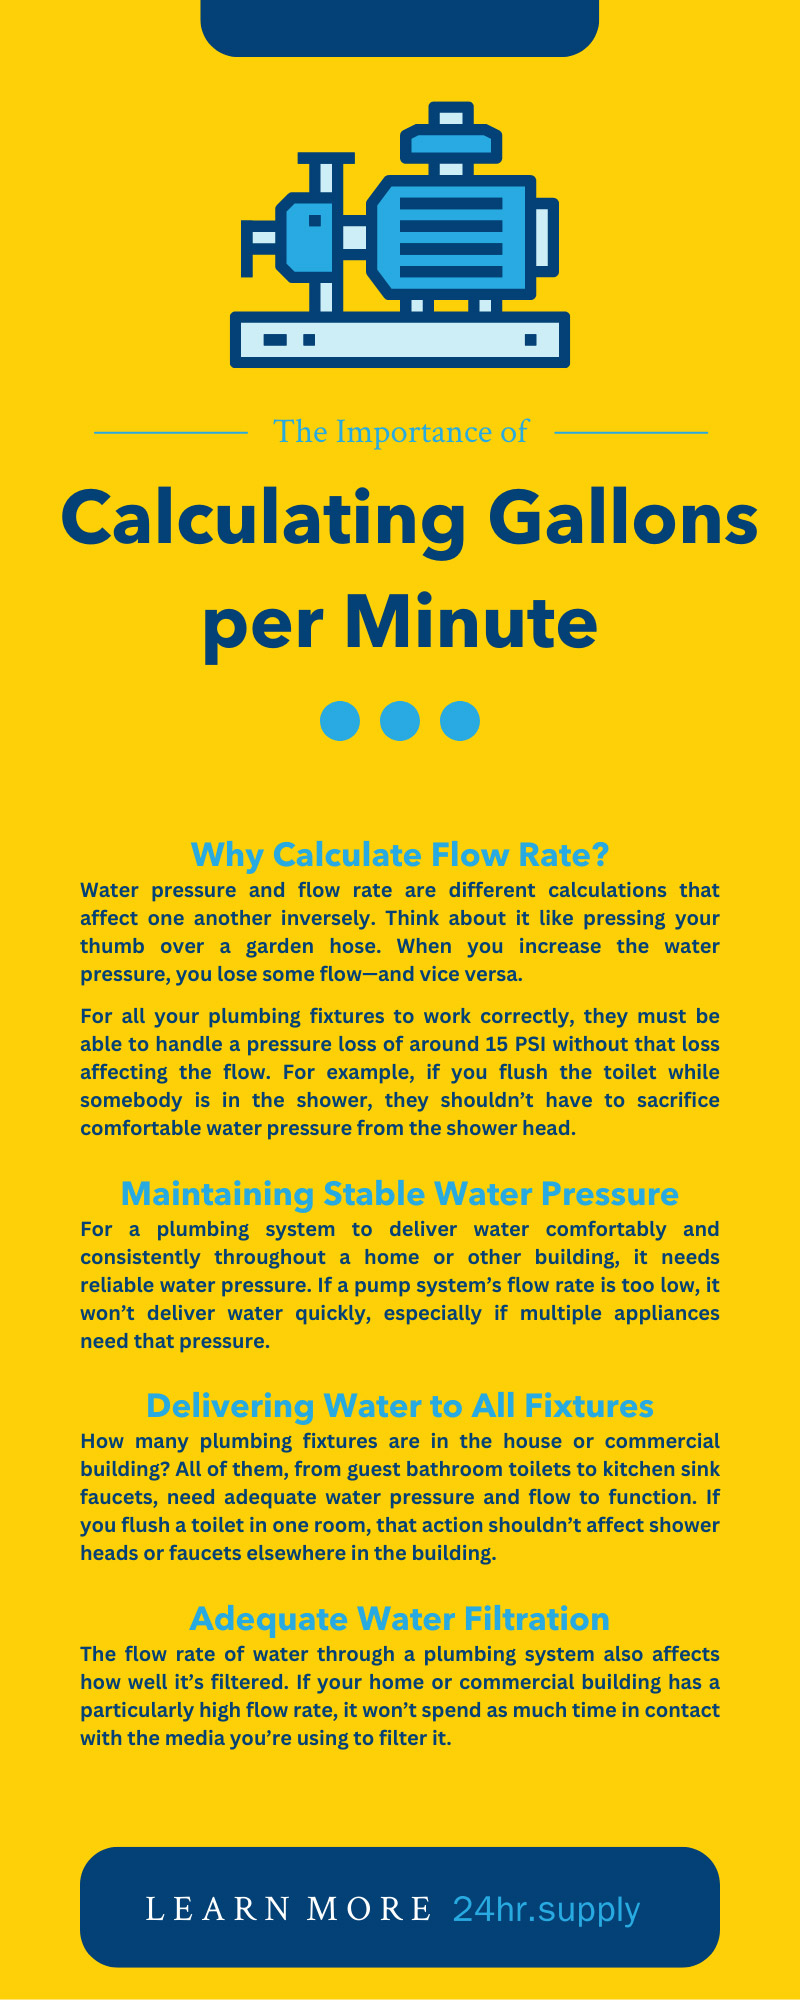 The Importance of Calculating Gallons per Minute